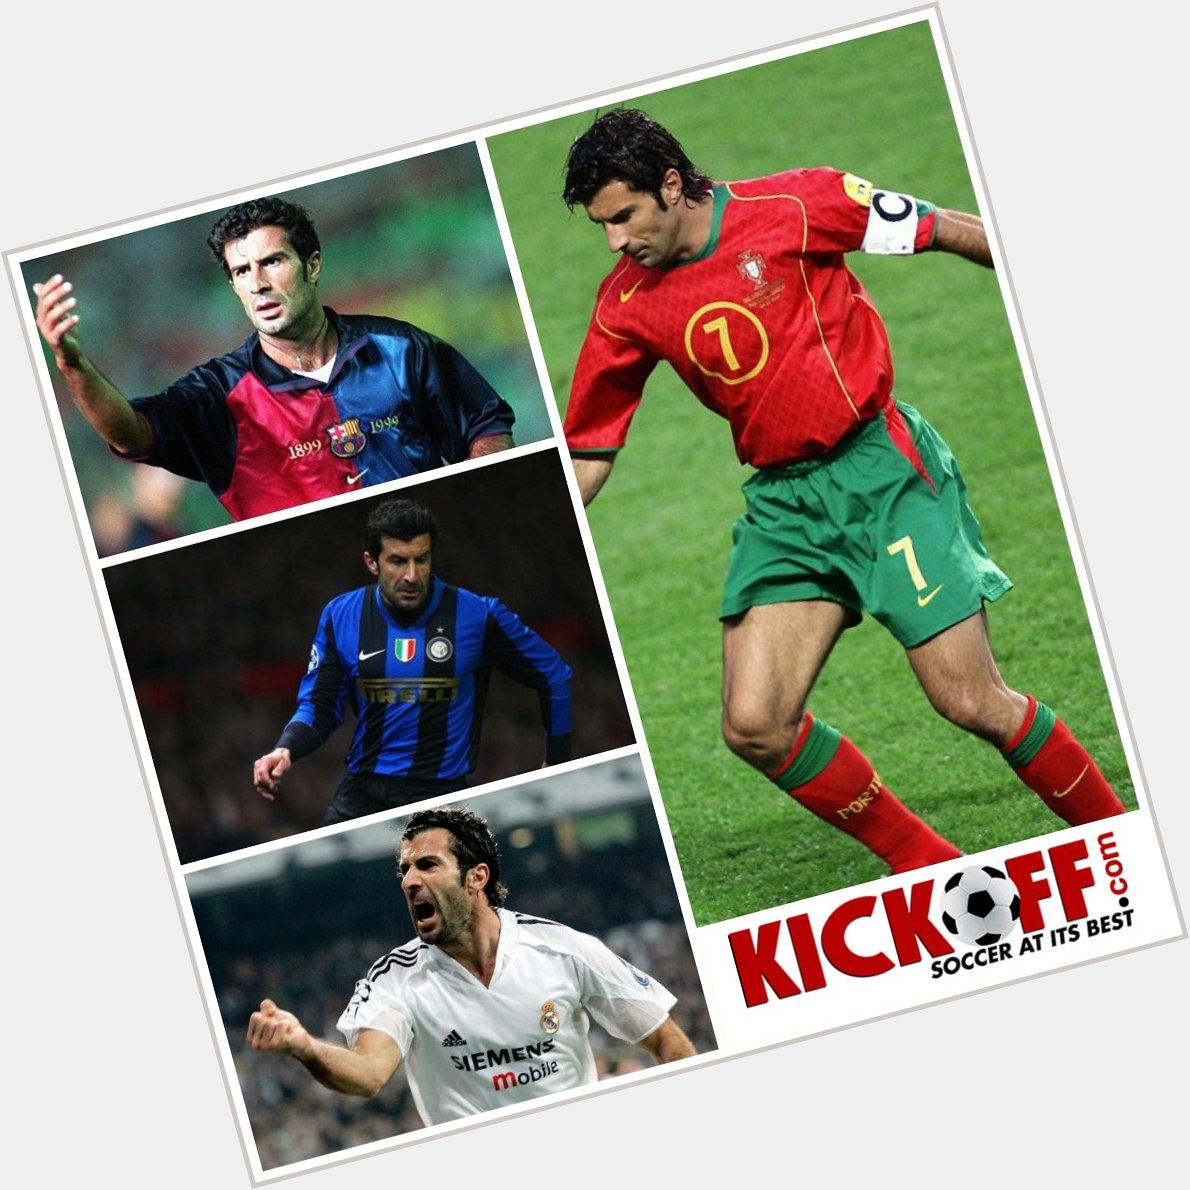 Happy Birthday Luis Figo. And Happy birthday to you reader if it\s your birthday as well! 